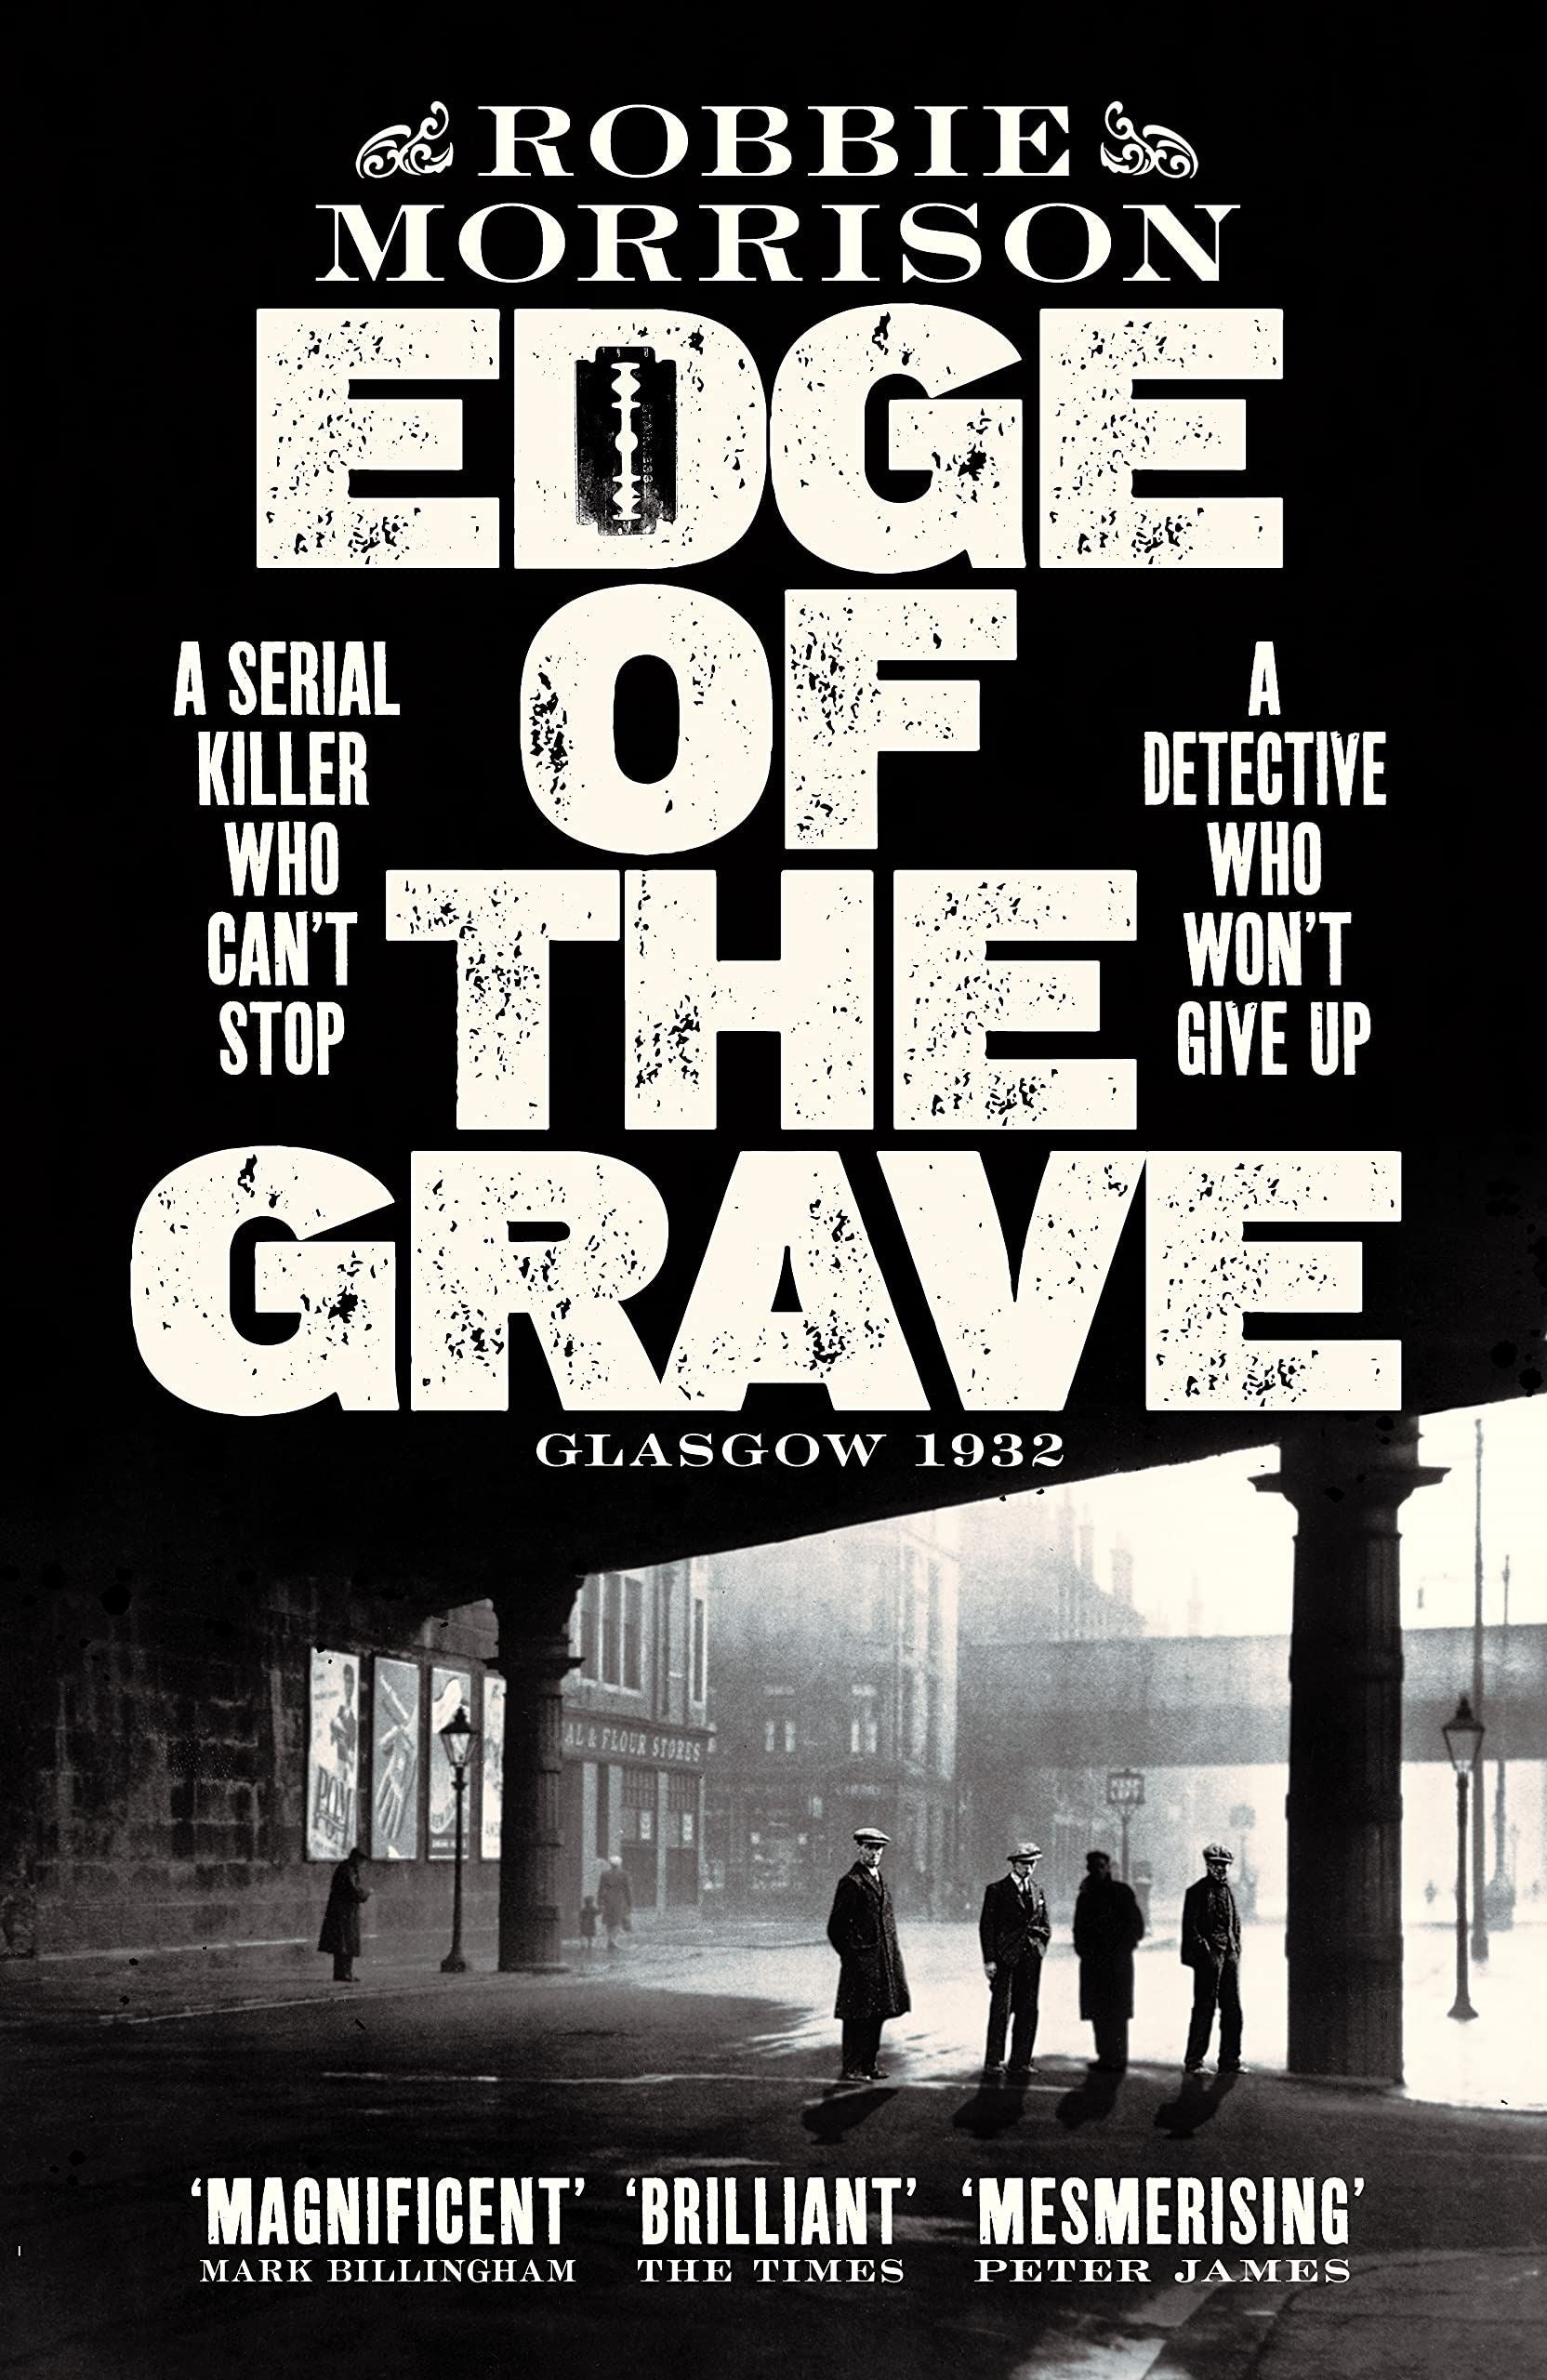 Edge Of The Grave